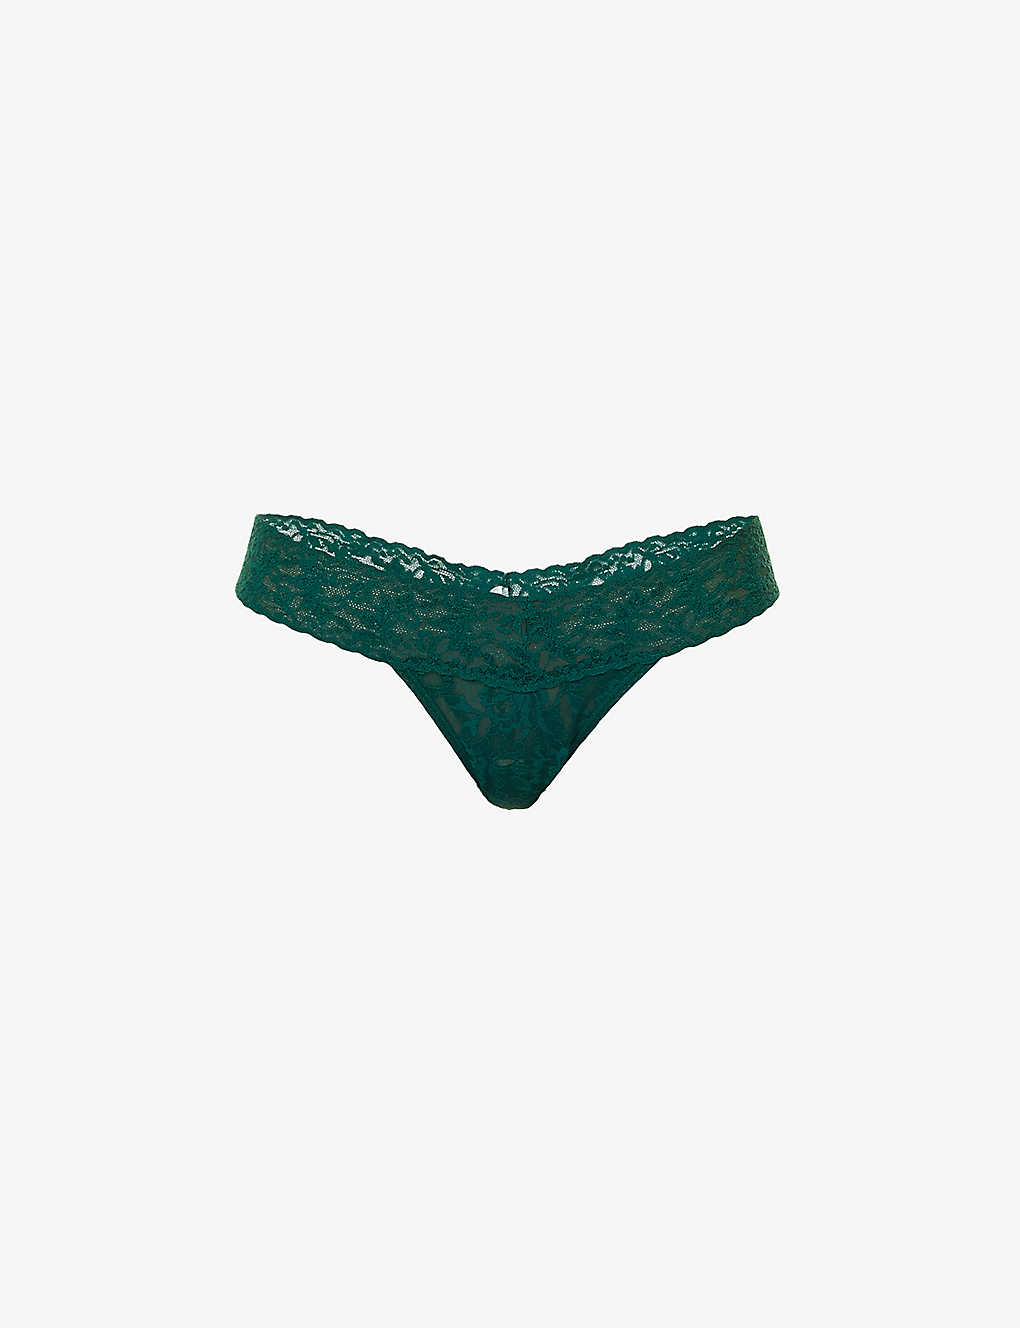 HANKY PANKY HANKY PANKY WOMEN'S GREEN QUEEN SIGNATURE MID-RISE LACE THONG,63976268